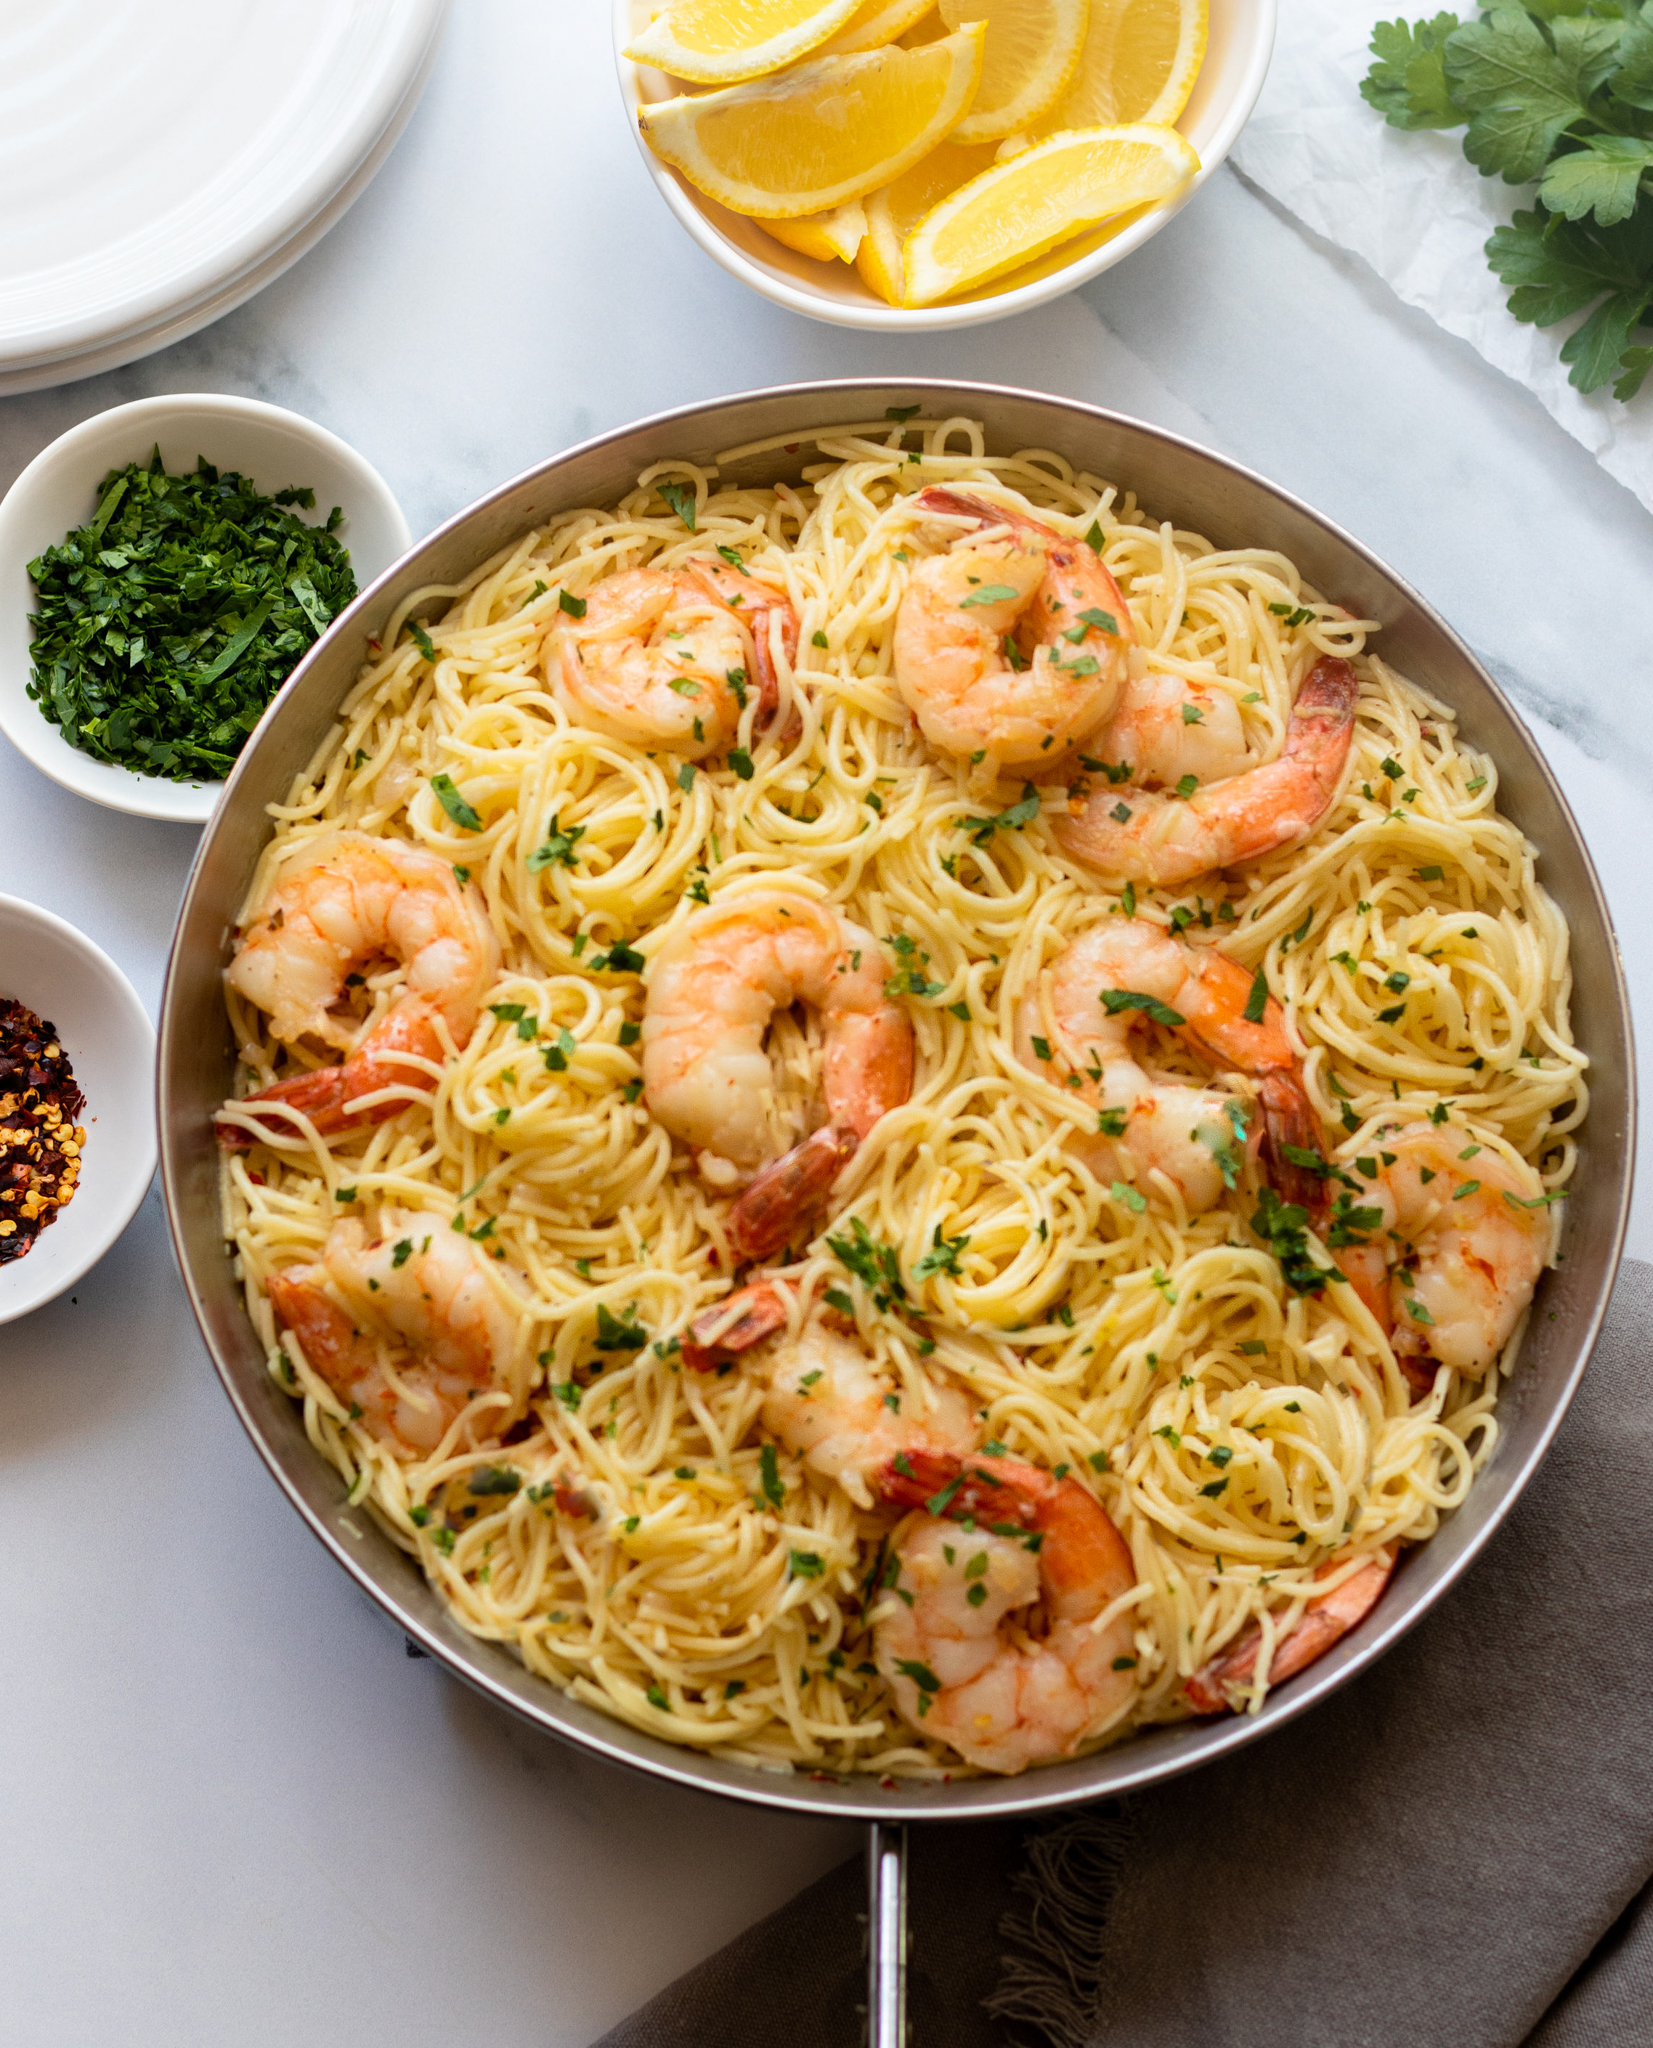 Spicy Shrimp Scampi With Angel Hair Pasta Recipe